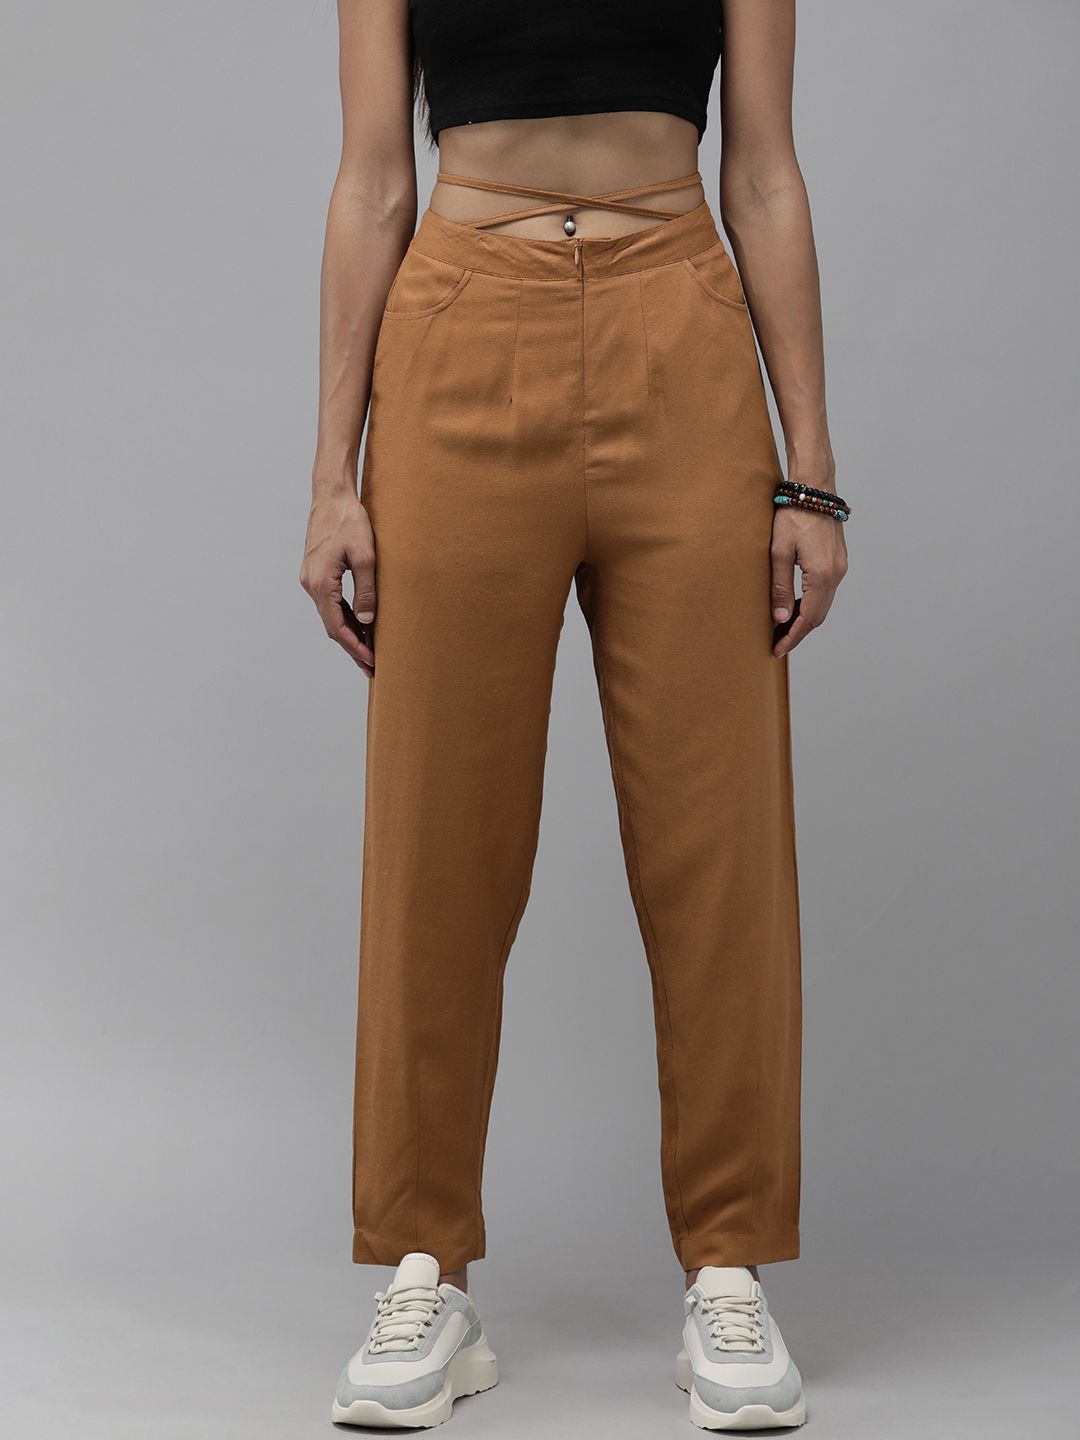 The Roadster Lifestyle Co. Women Brown Solid Trousers Price in India